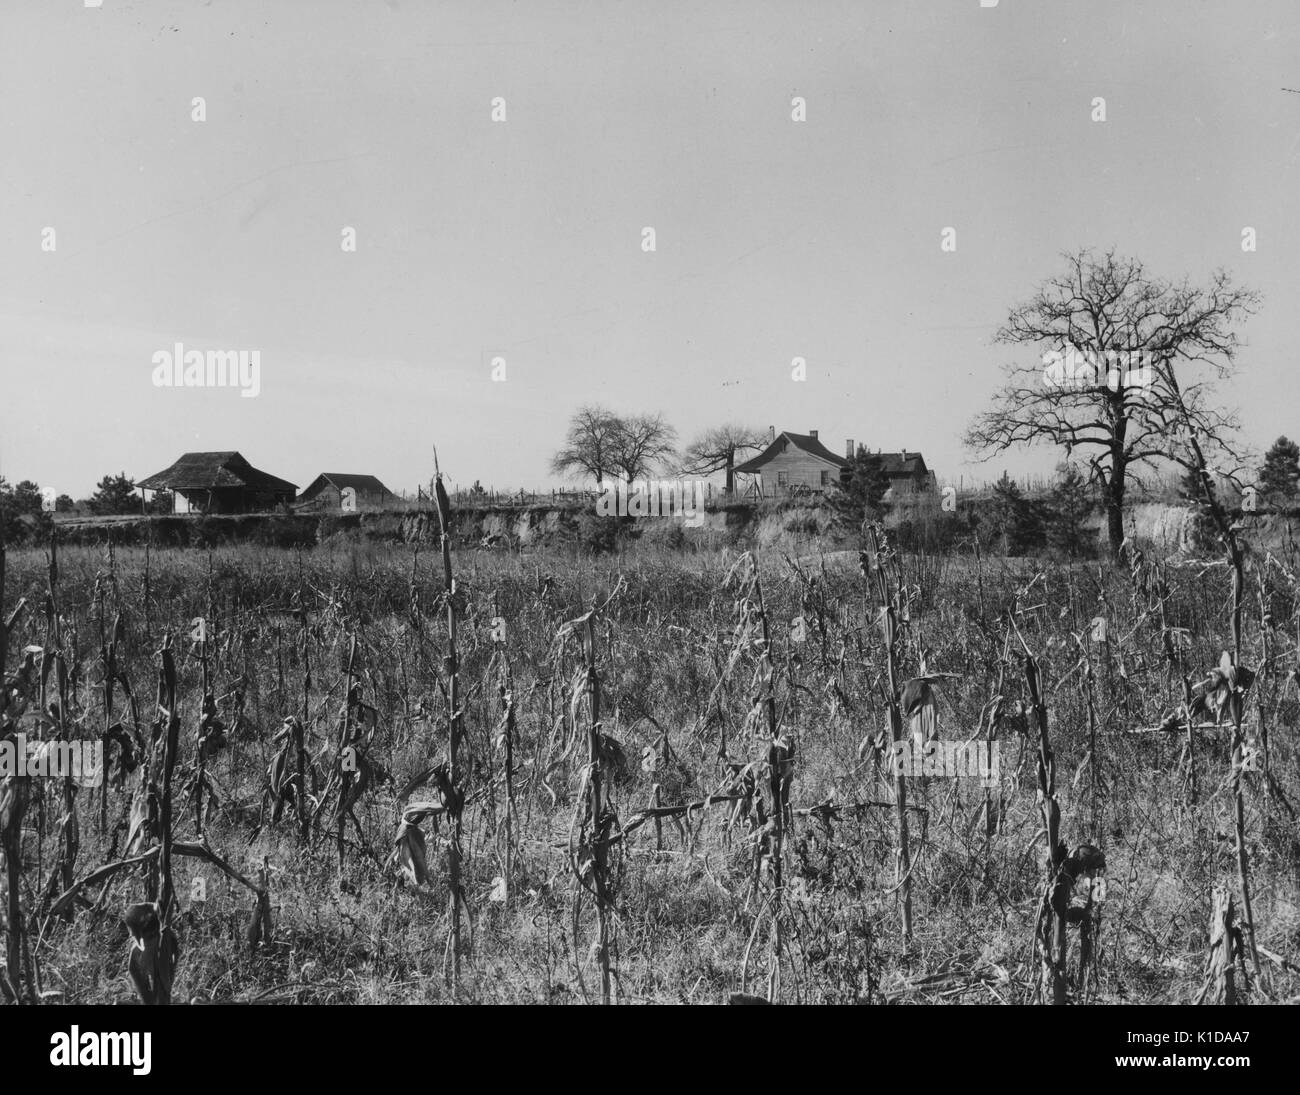 Wooden farm structures in the background, field with dried corn plants in the foreground, large tree at the upper right corner; Wayne County, North Carolina, 1936. From the New York Public Library. Stock Photo